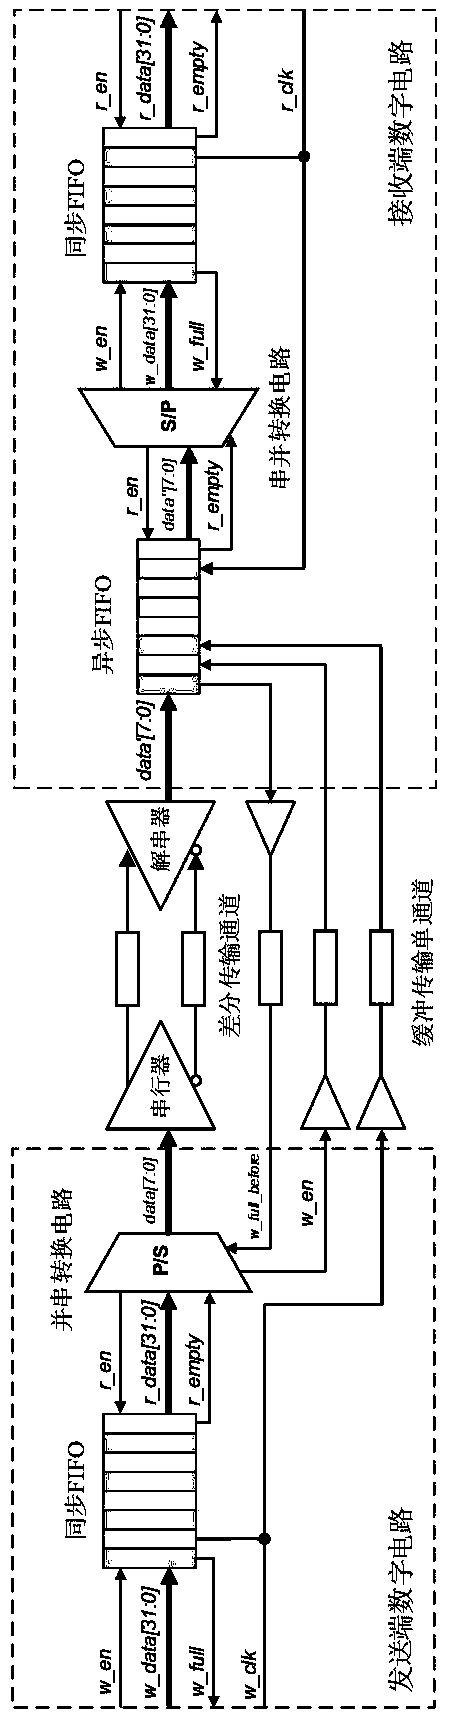 FIFO protocol based digital interface circuit for SerDes technology